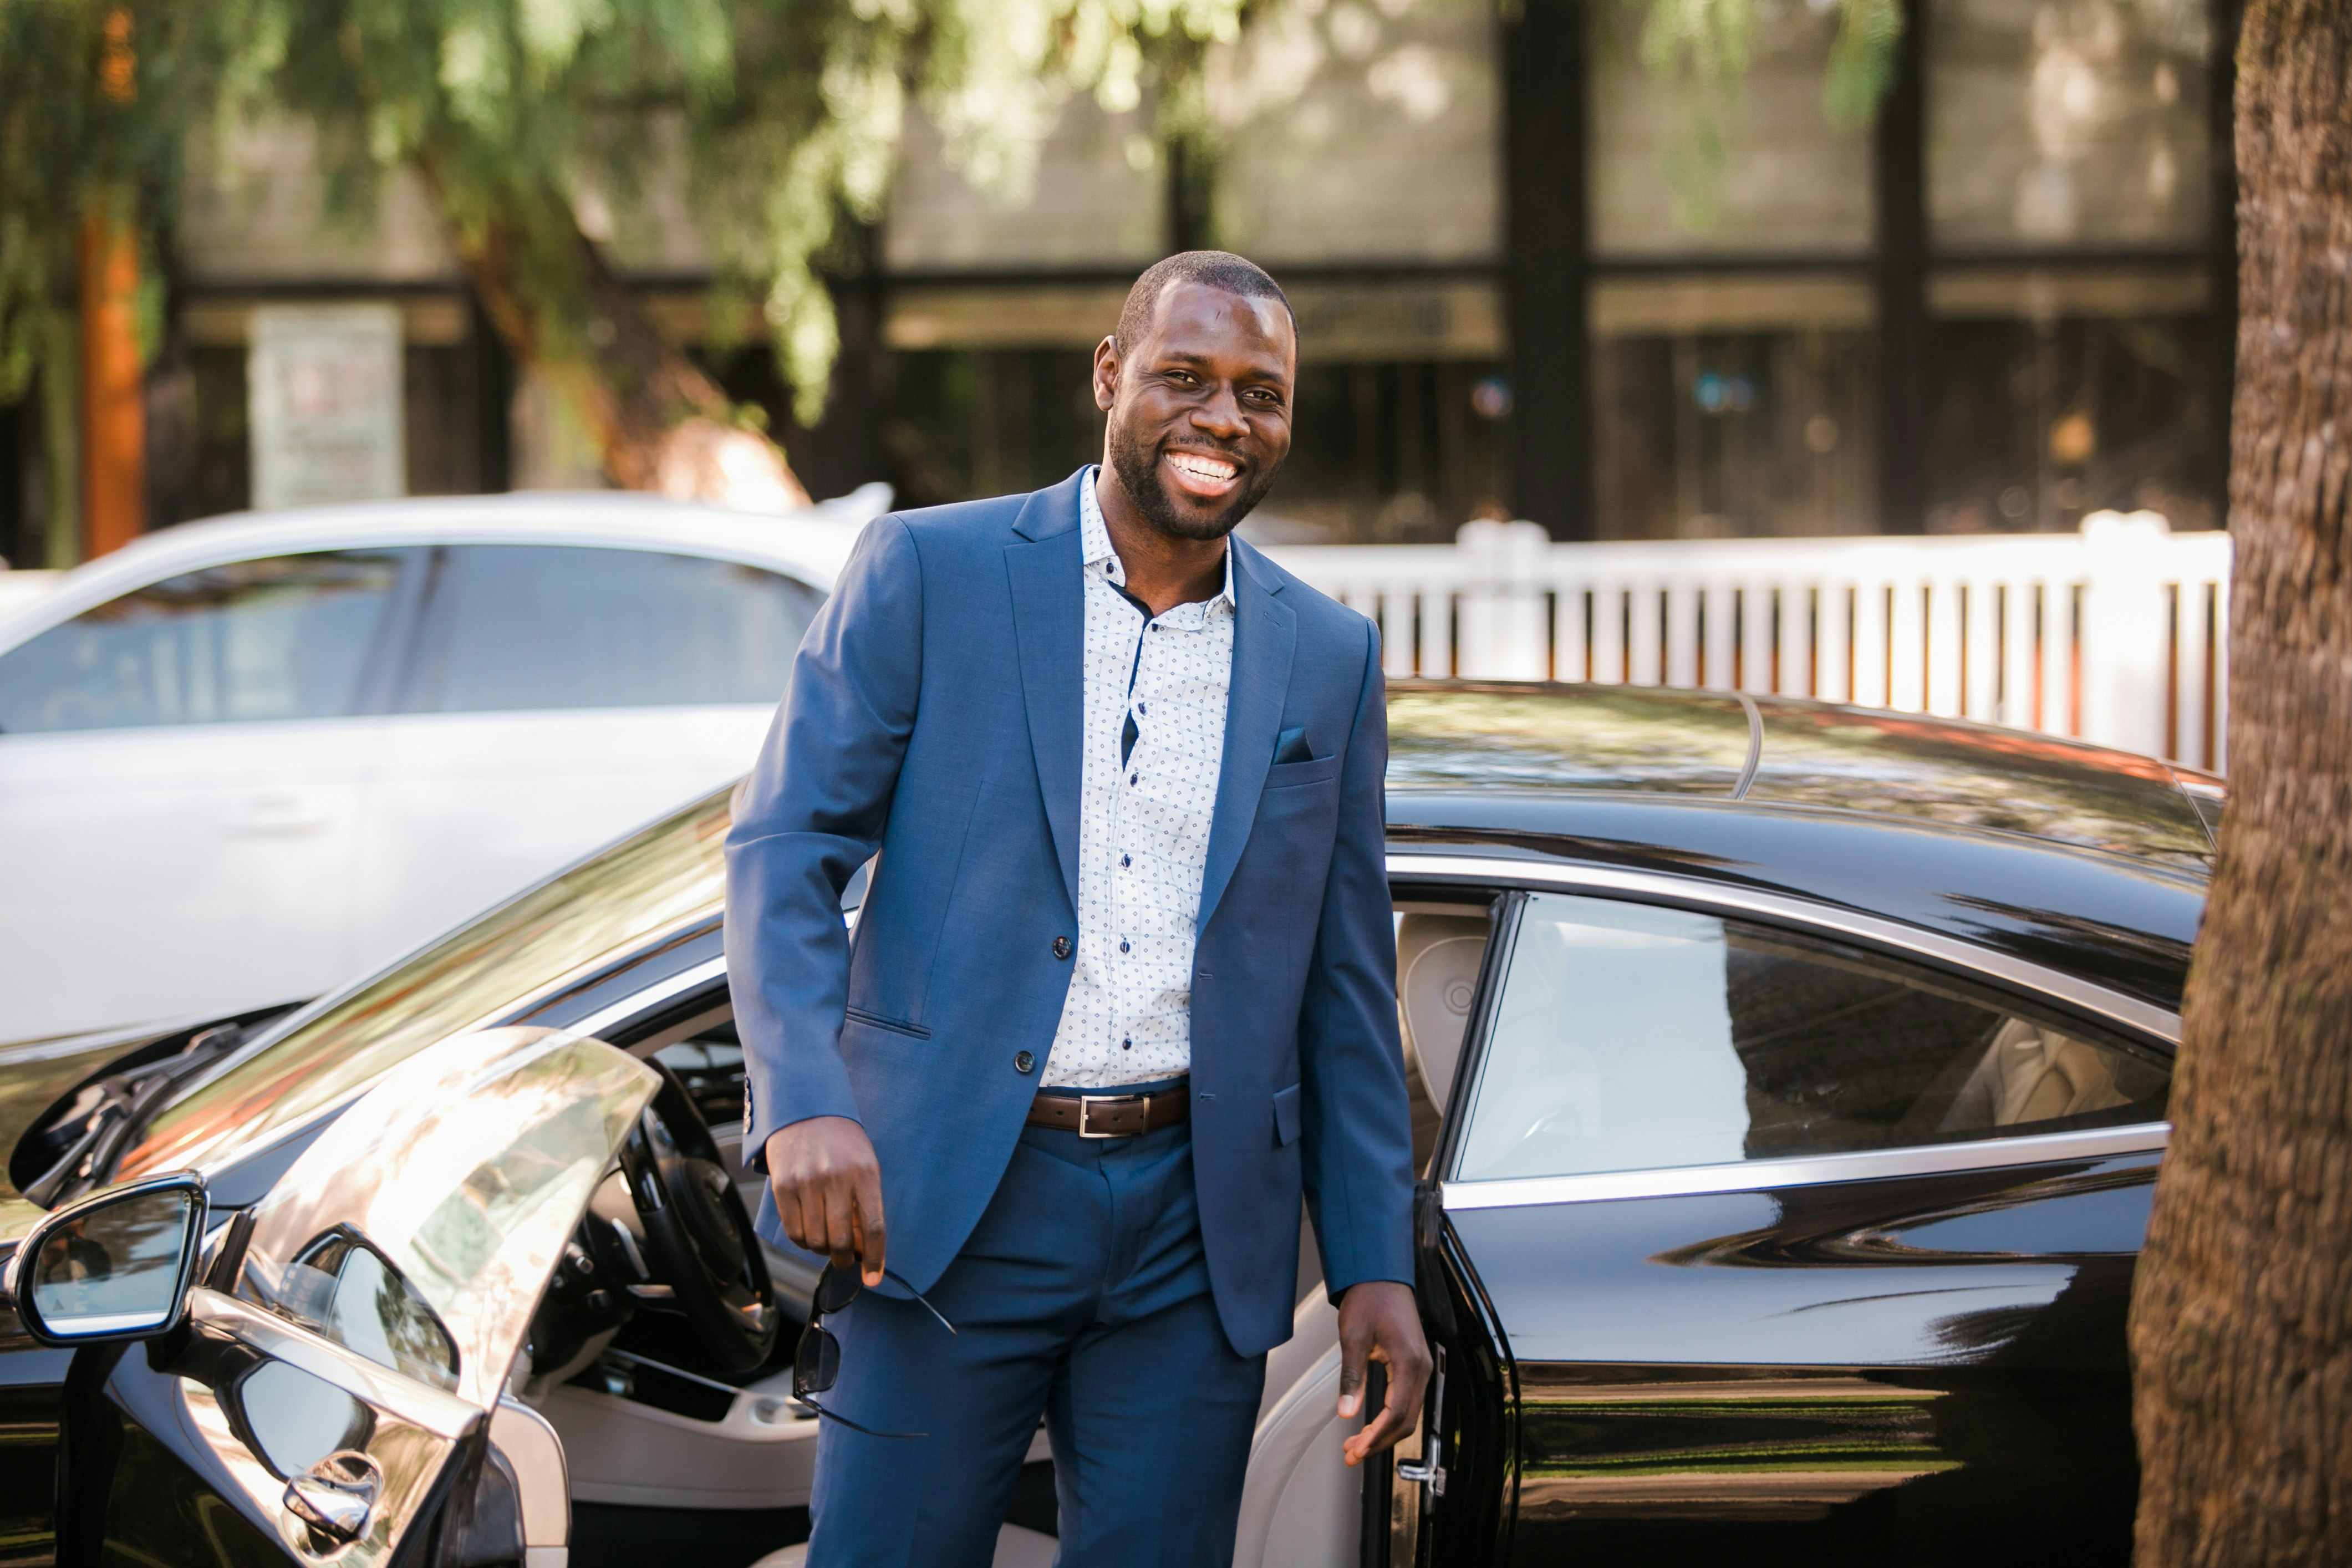 Fortune Vieyra wearing a blue business suit and smiling in front of a Mercedes